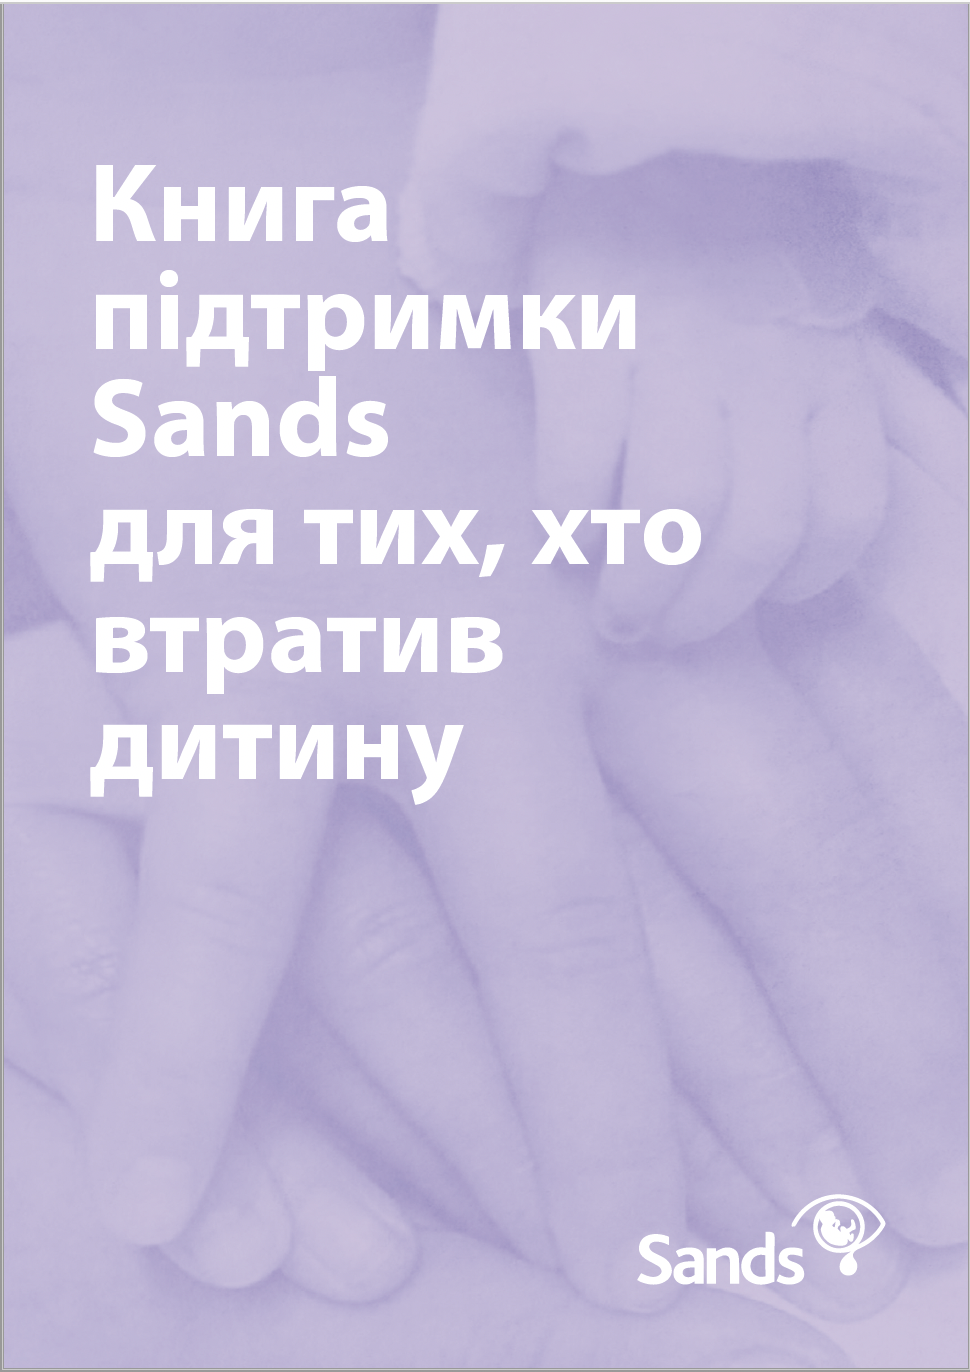 Front cover of the Ukranian bereavement support book